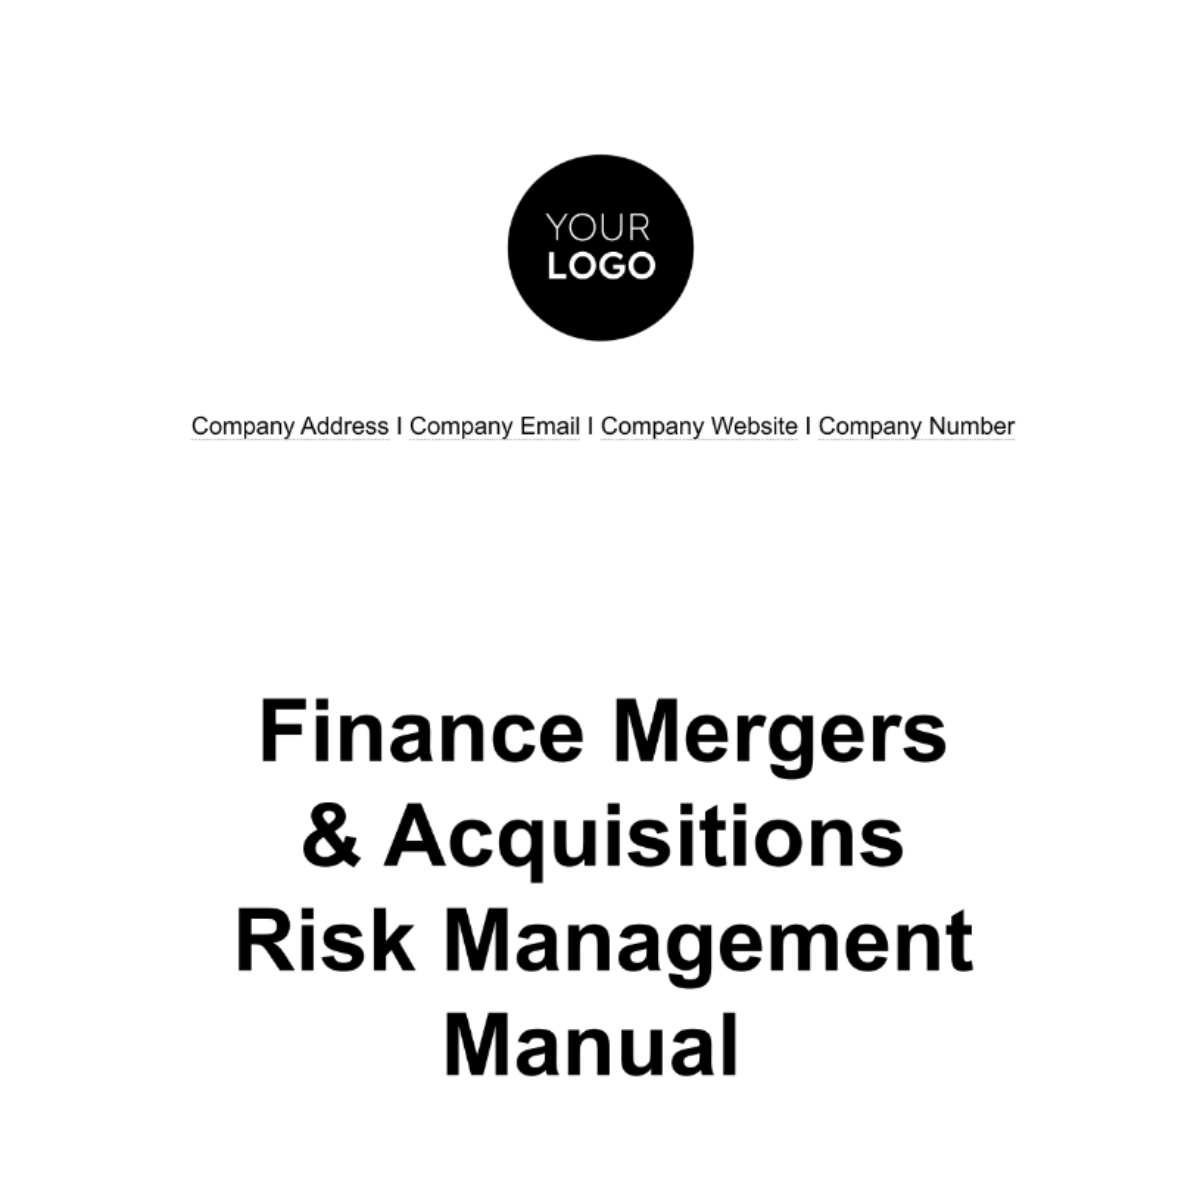 Free Finance Mergers & Acquisitions Risk Management Manual Template